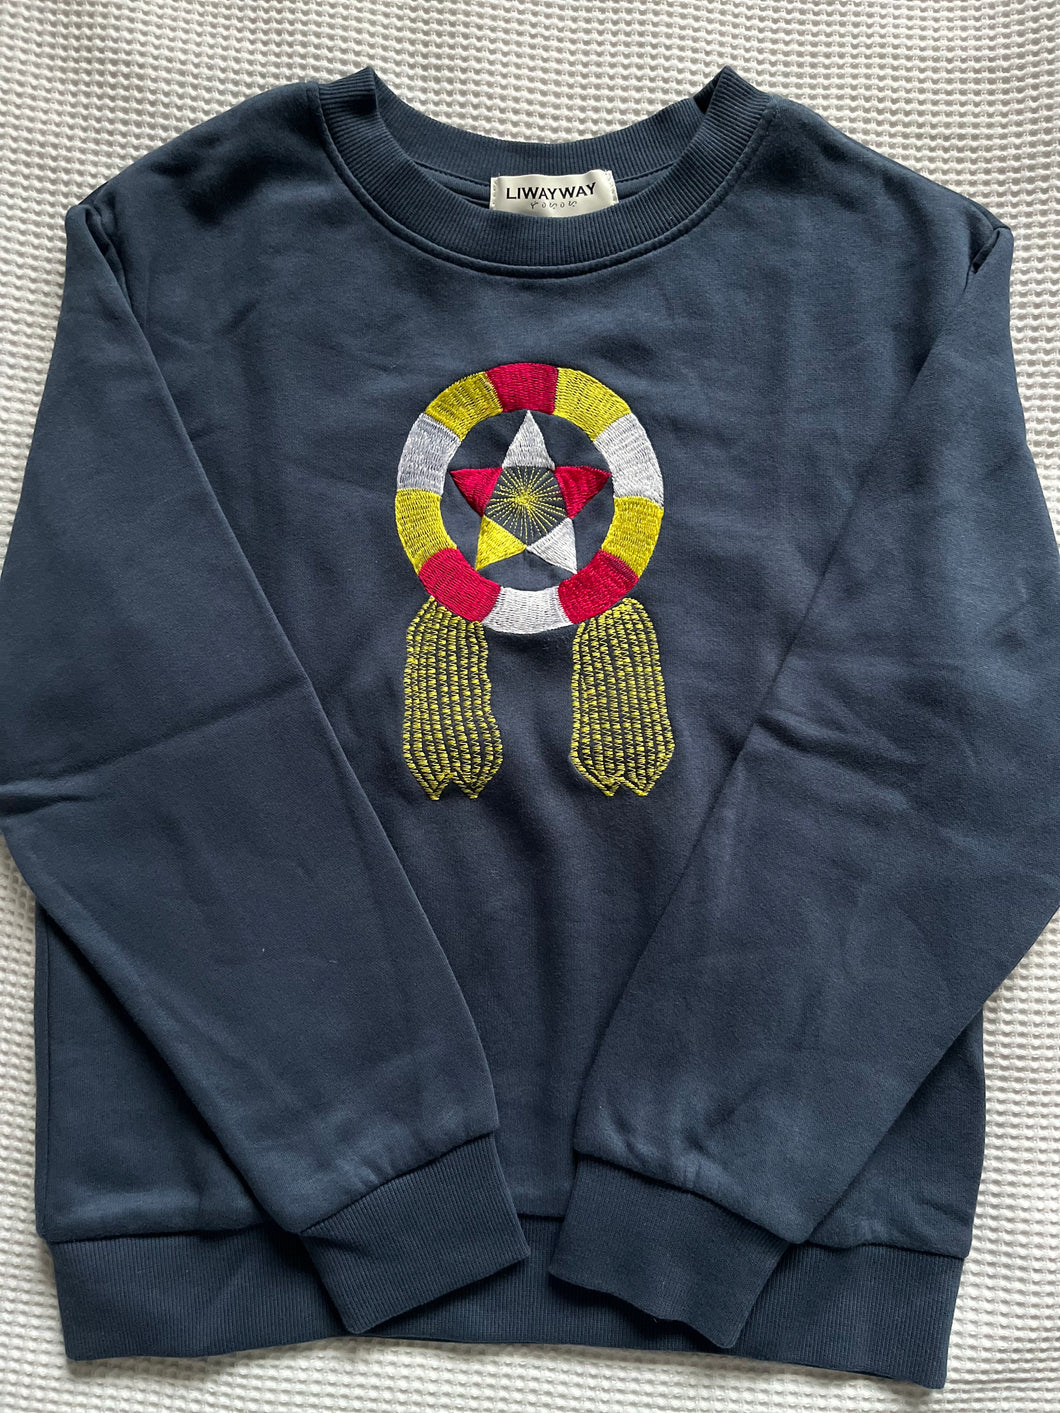 Parol sweater 08 for 8-10yrs old